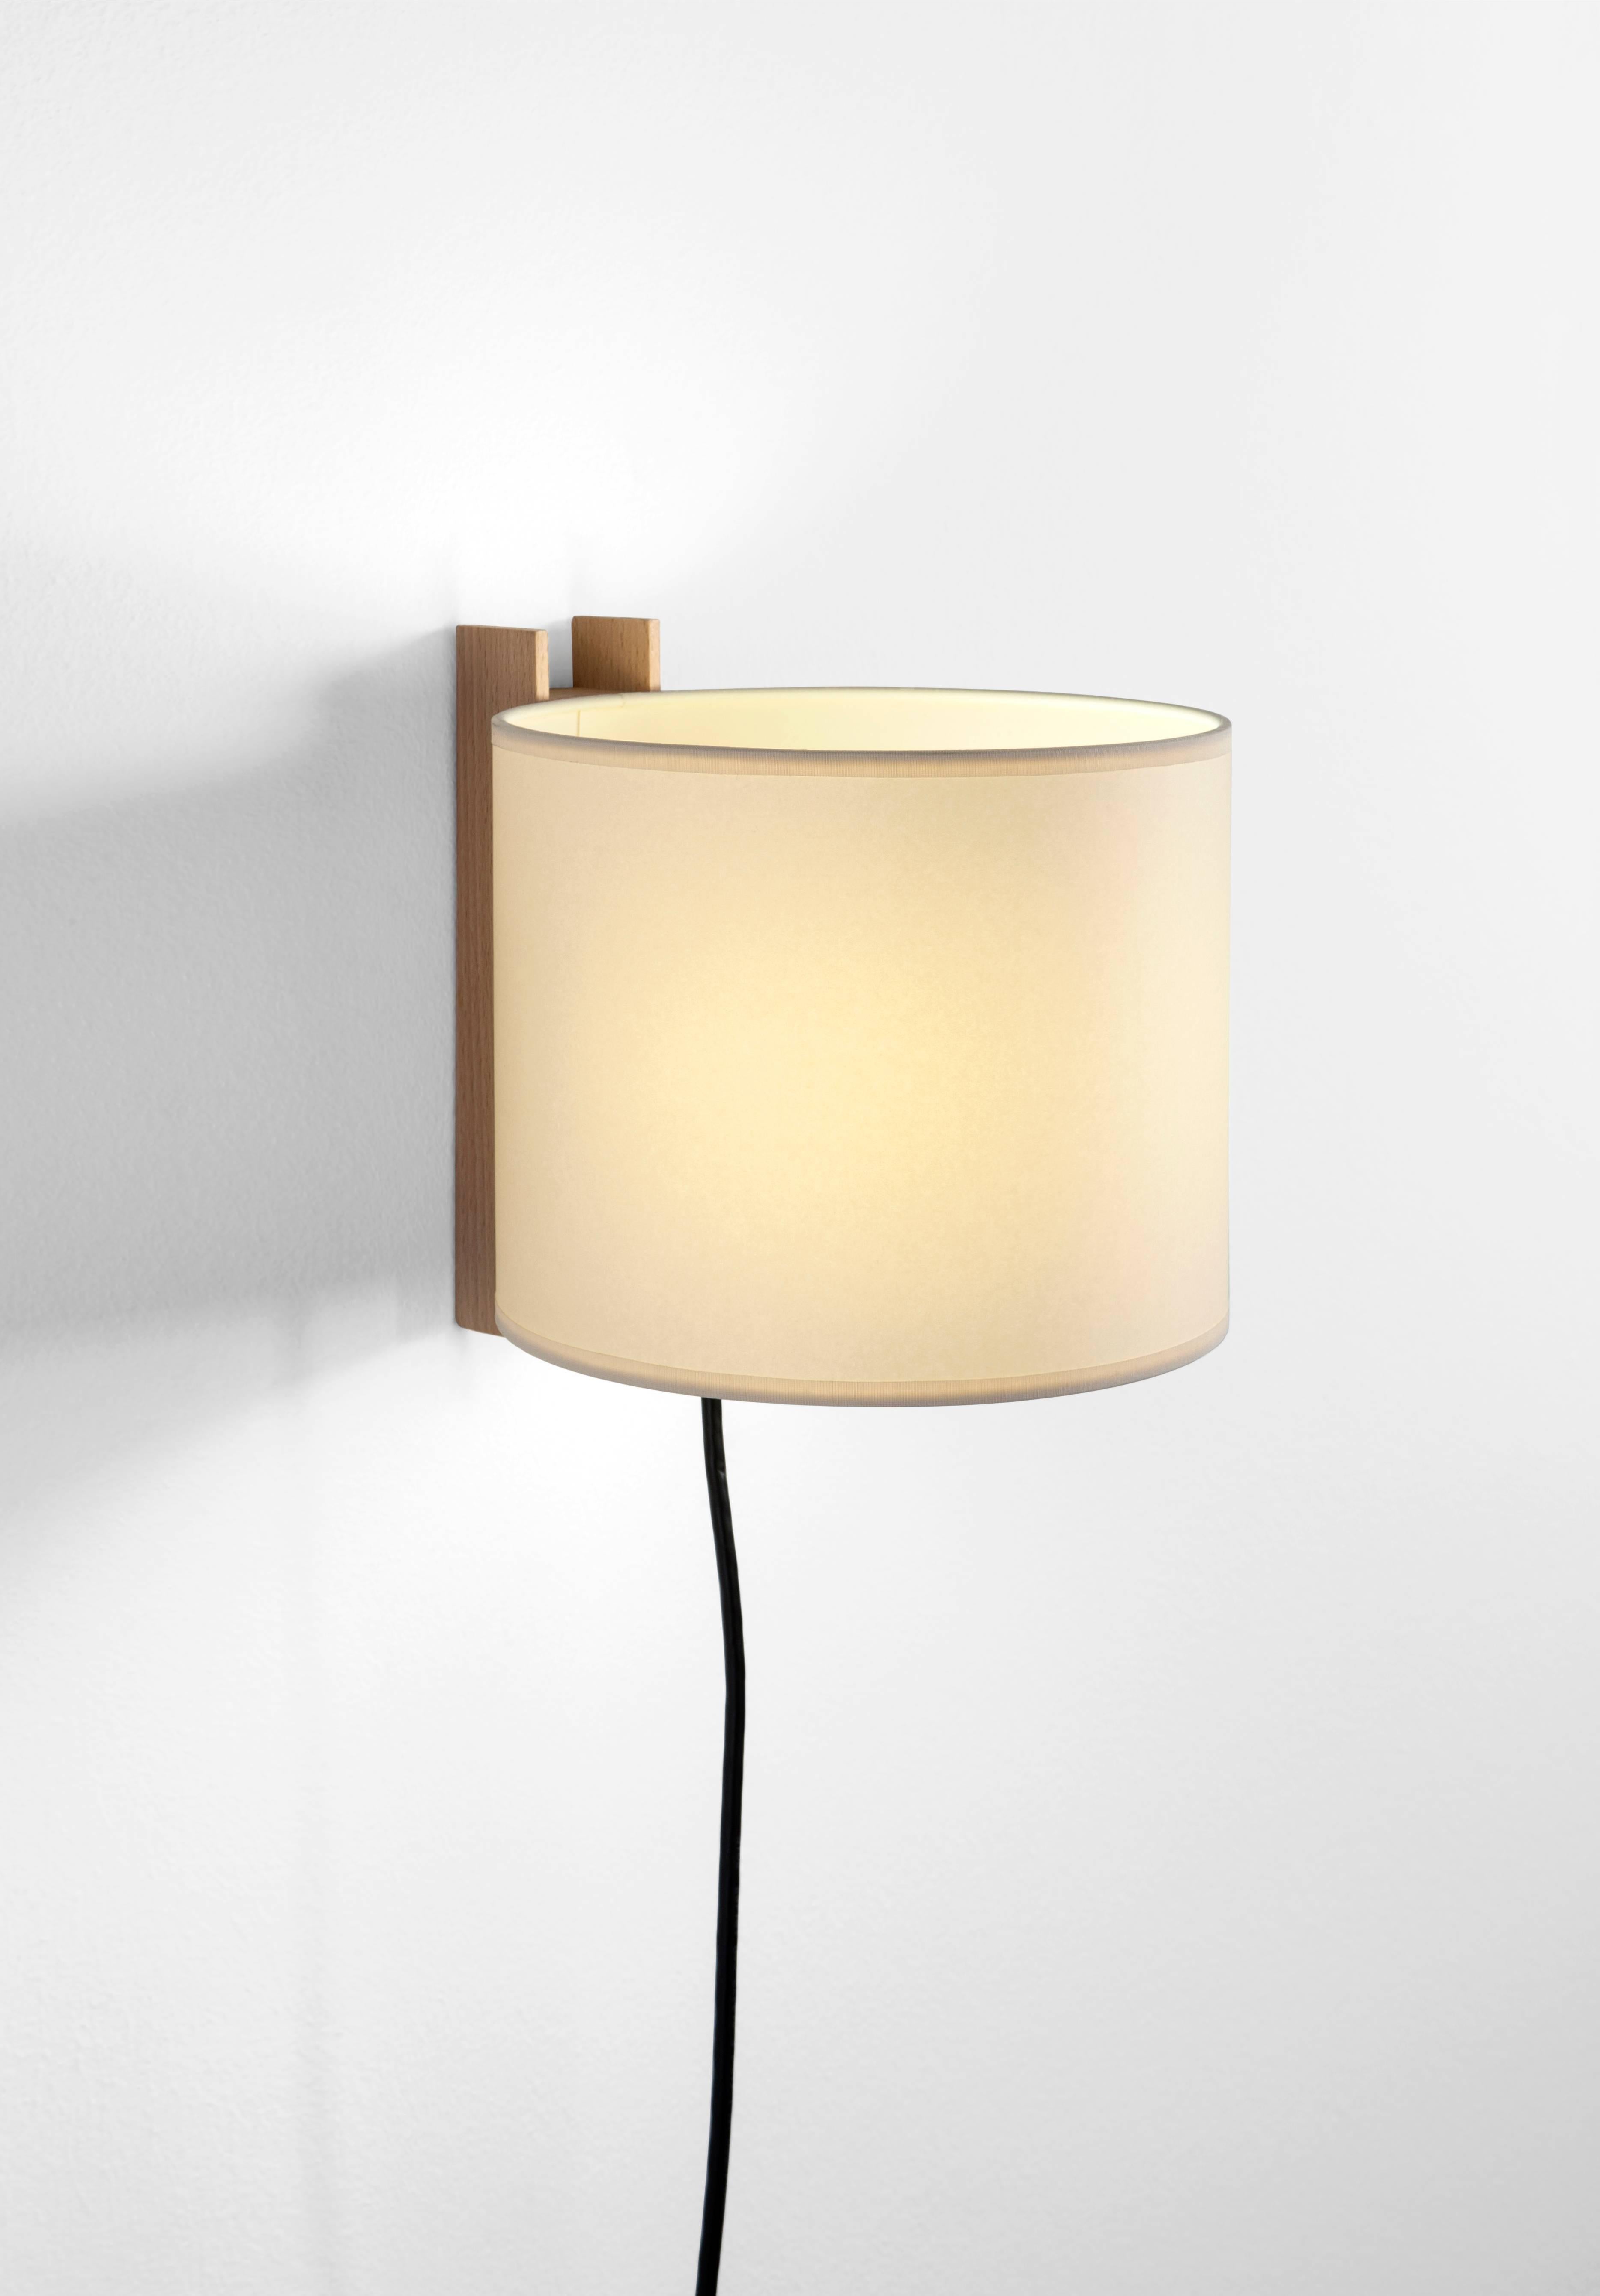 TMM Corto Wall Light by Miguel Mila for Santa & Cole. Originally designed in Spain in 1964. The TMM collection of short and long wall lamps comprises a simple beech channel into which the white or beige parchment shade is partially inserted. The